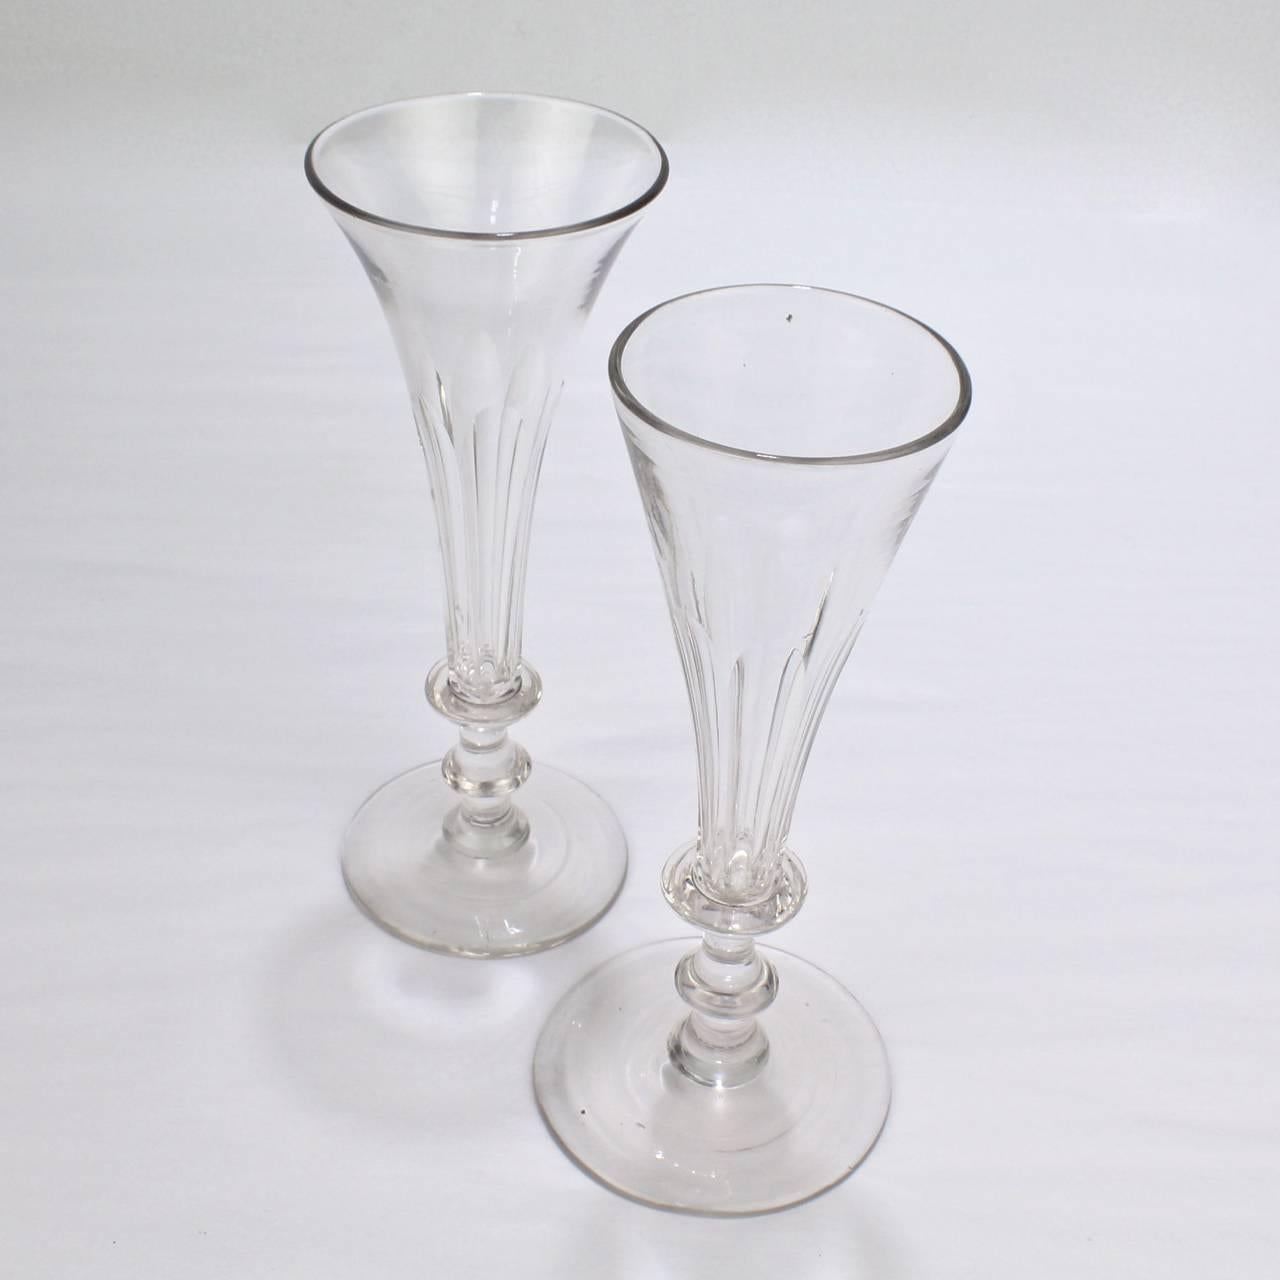 A fine, near pair of early Regency Period Anglo-Irish glass champagne flutes.

Two fine handblown examples with faceted, trumpet form flutes supported on a stems with angular knops and a wafer feet. Each with charming signs of handmade production